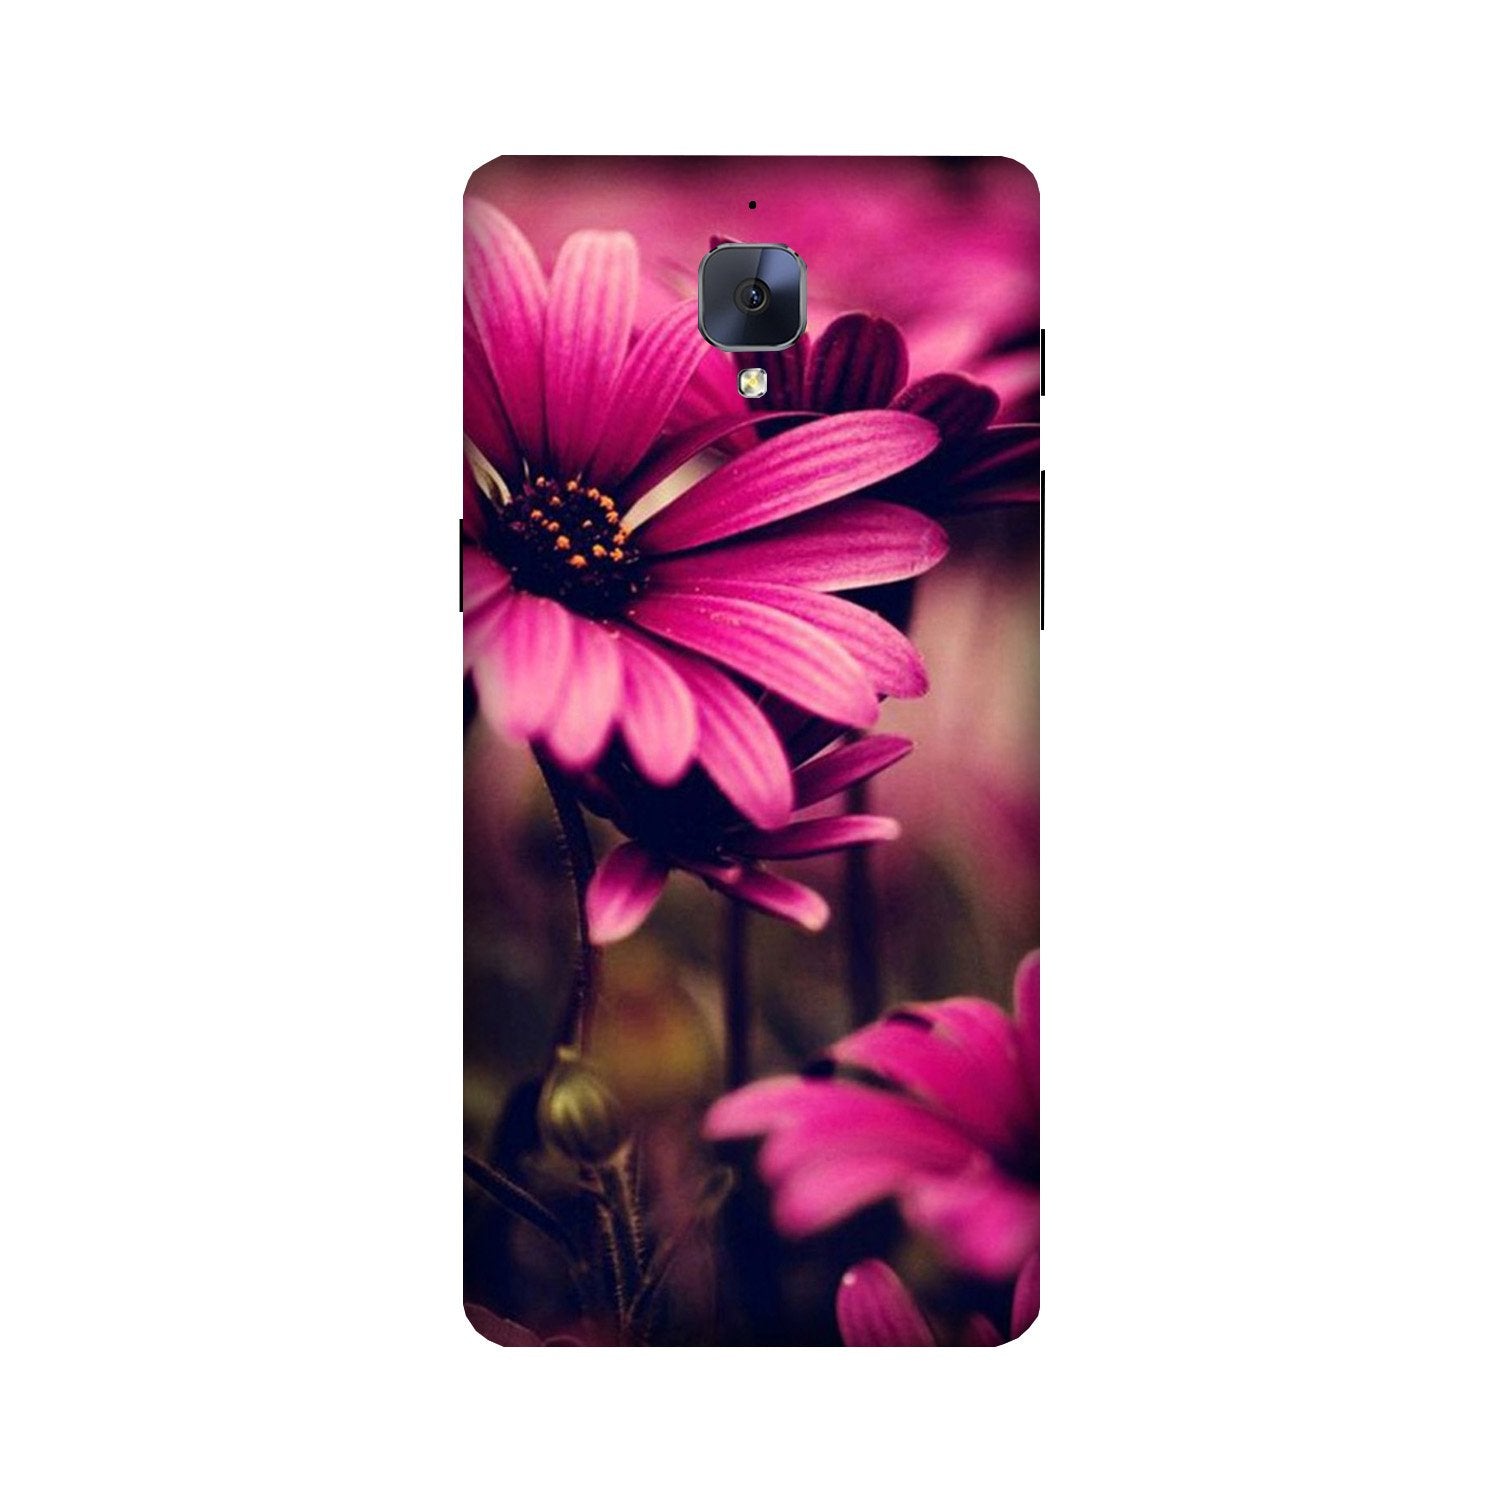 Purple Daisy Case for OnePlus 3/ 3T